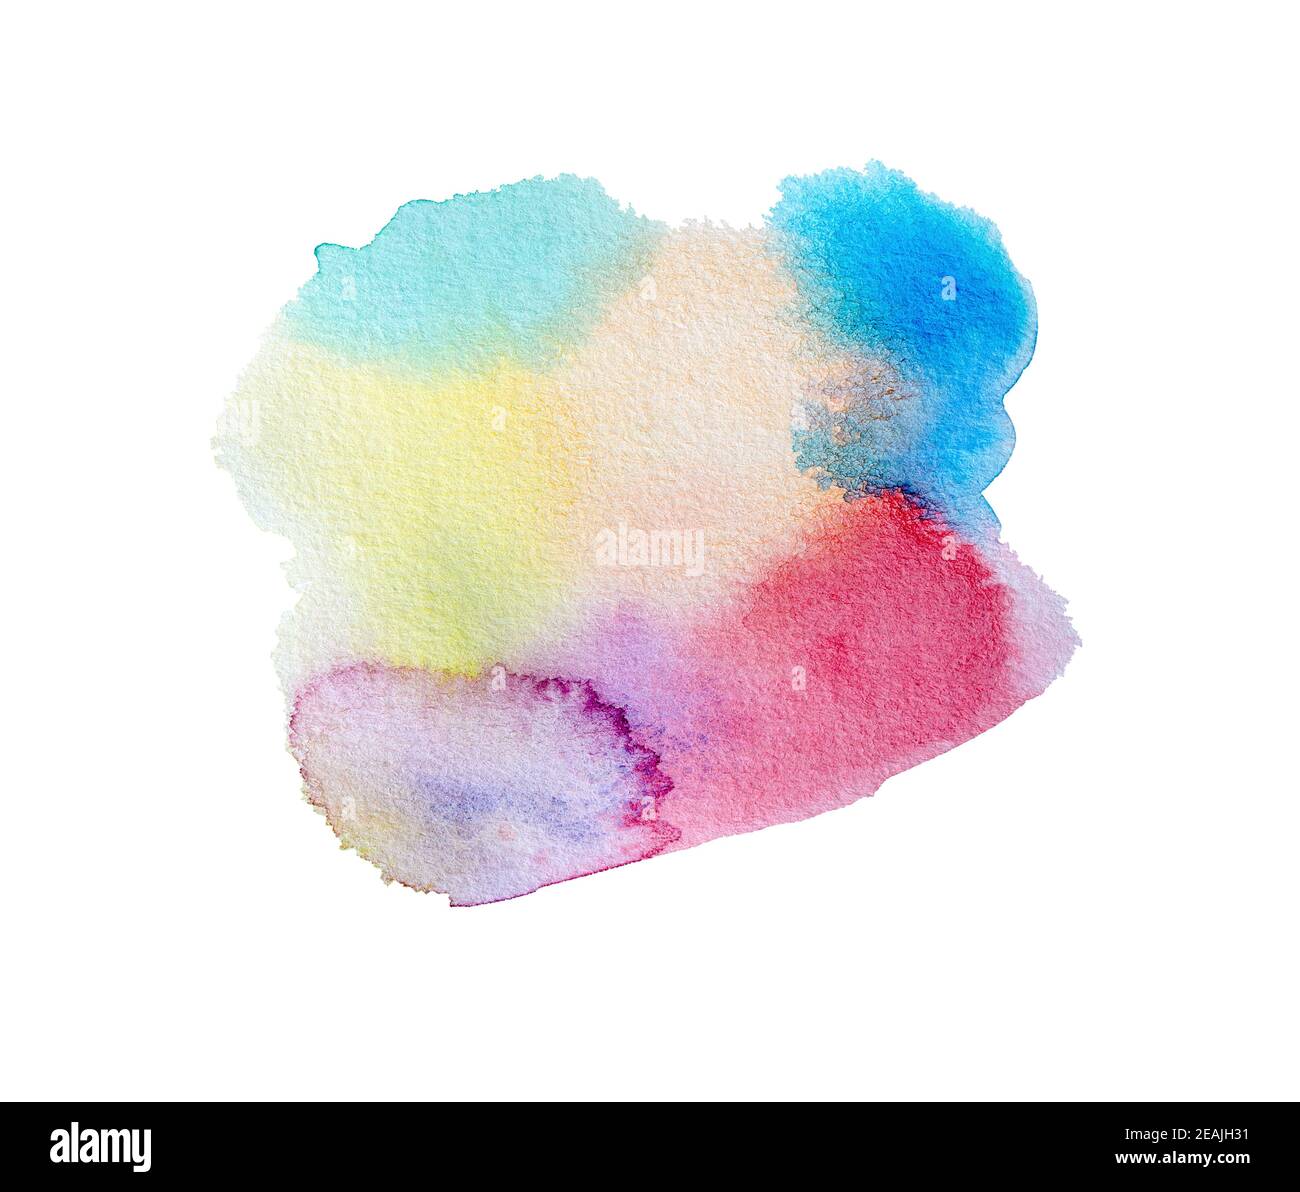 Abstract colorful hand painted watercolor on white background. Stock Photo